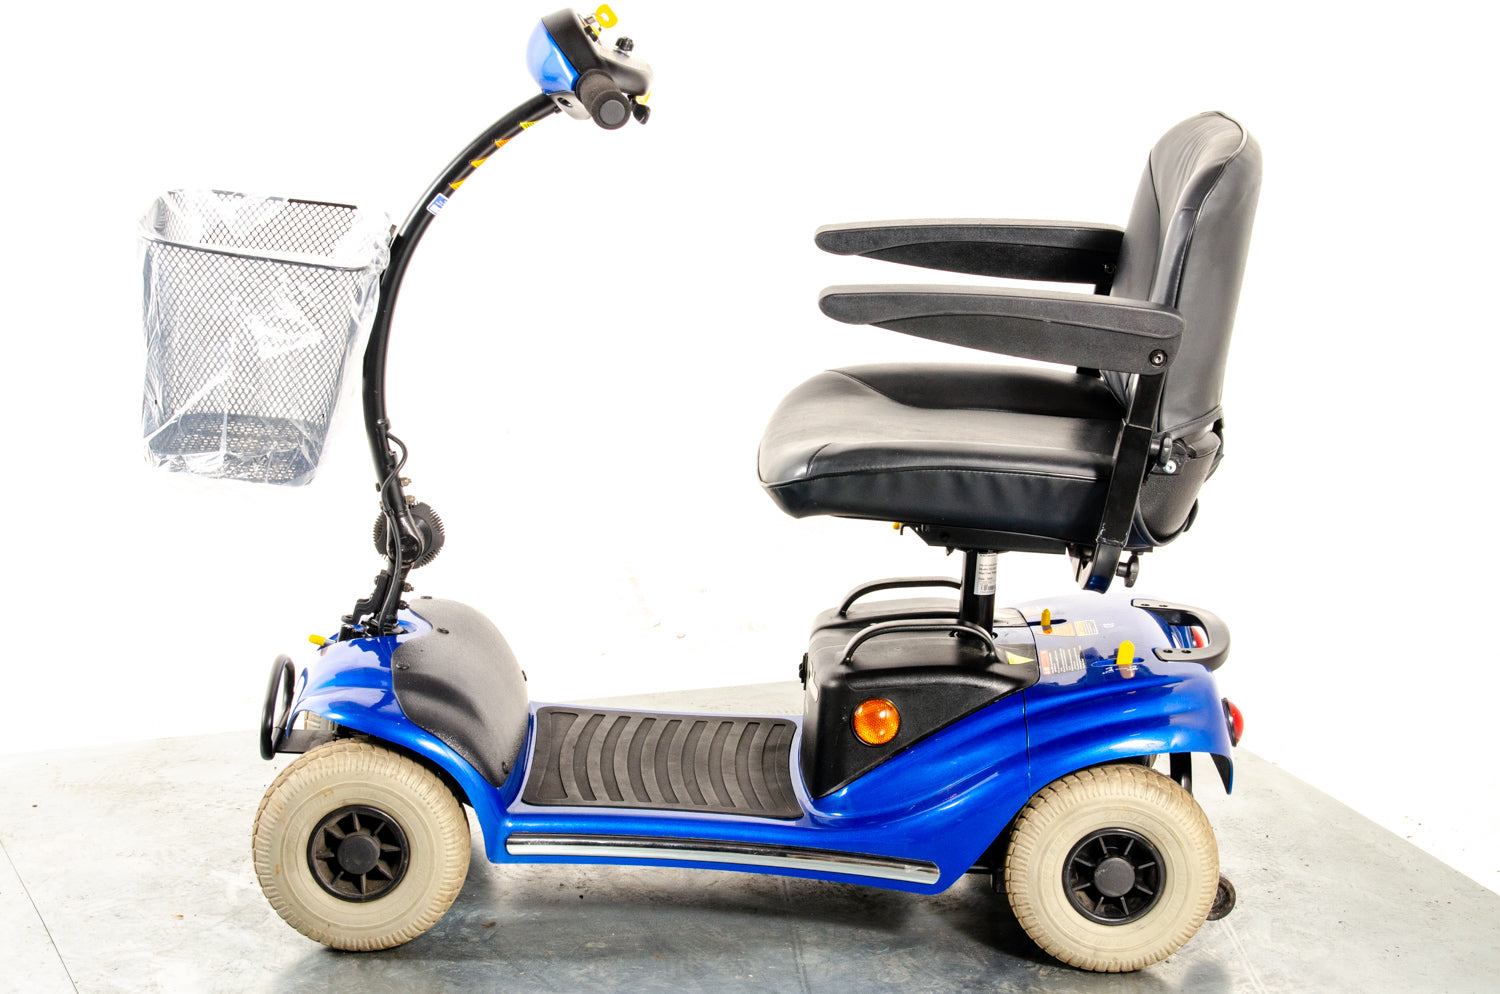 Sunrise Medical Bootmaster Elite Mobility Scooter Small Transportable Boot Shoprider Paris Blue